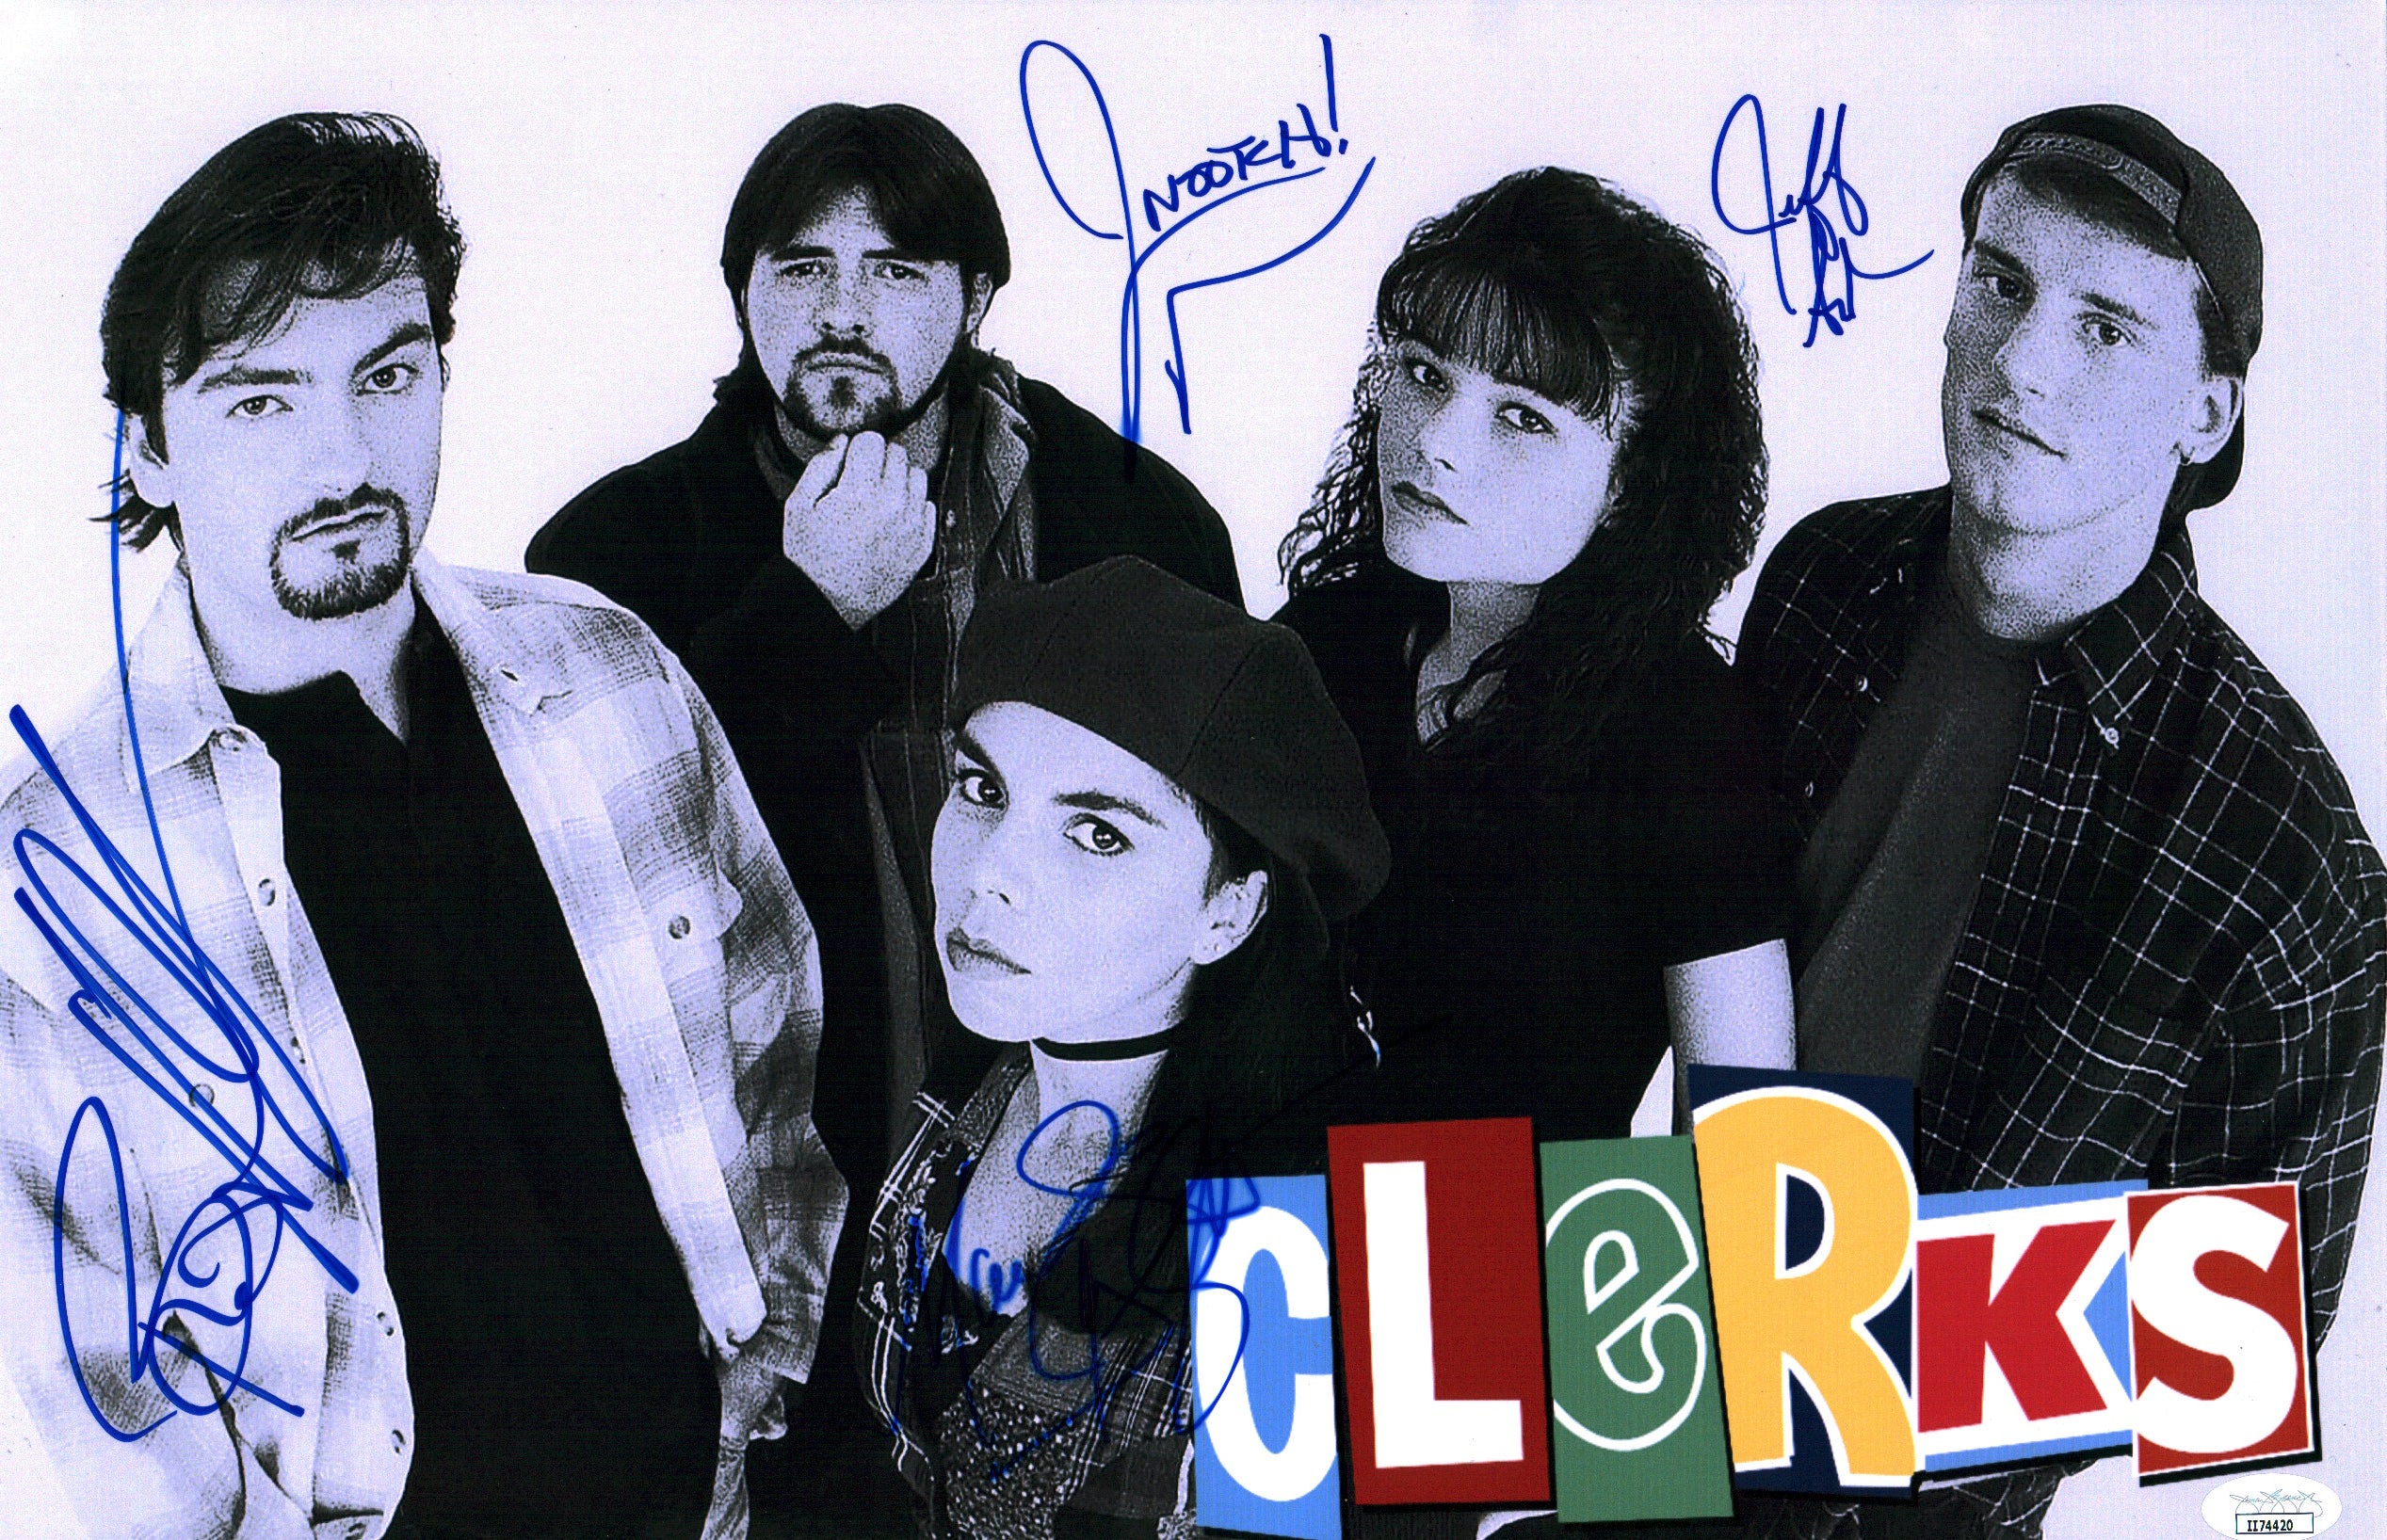 Clerks 11x17 Mini Poster Cast x4 Signed Anderson, Ghigliotti, O'Halloran, Mewes JSA Certified Autograph